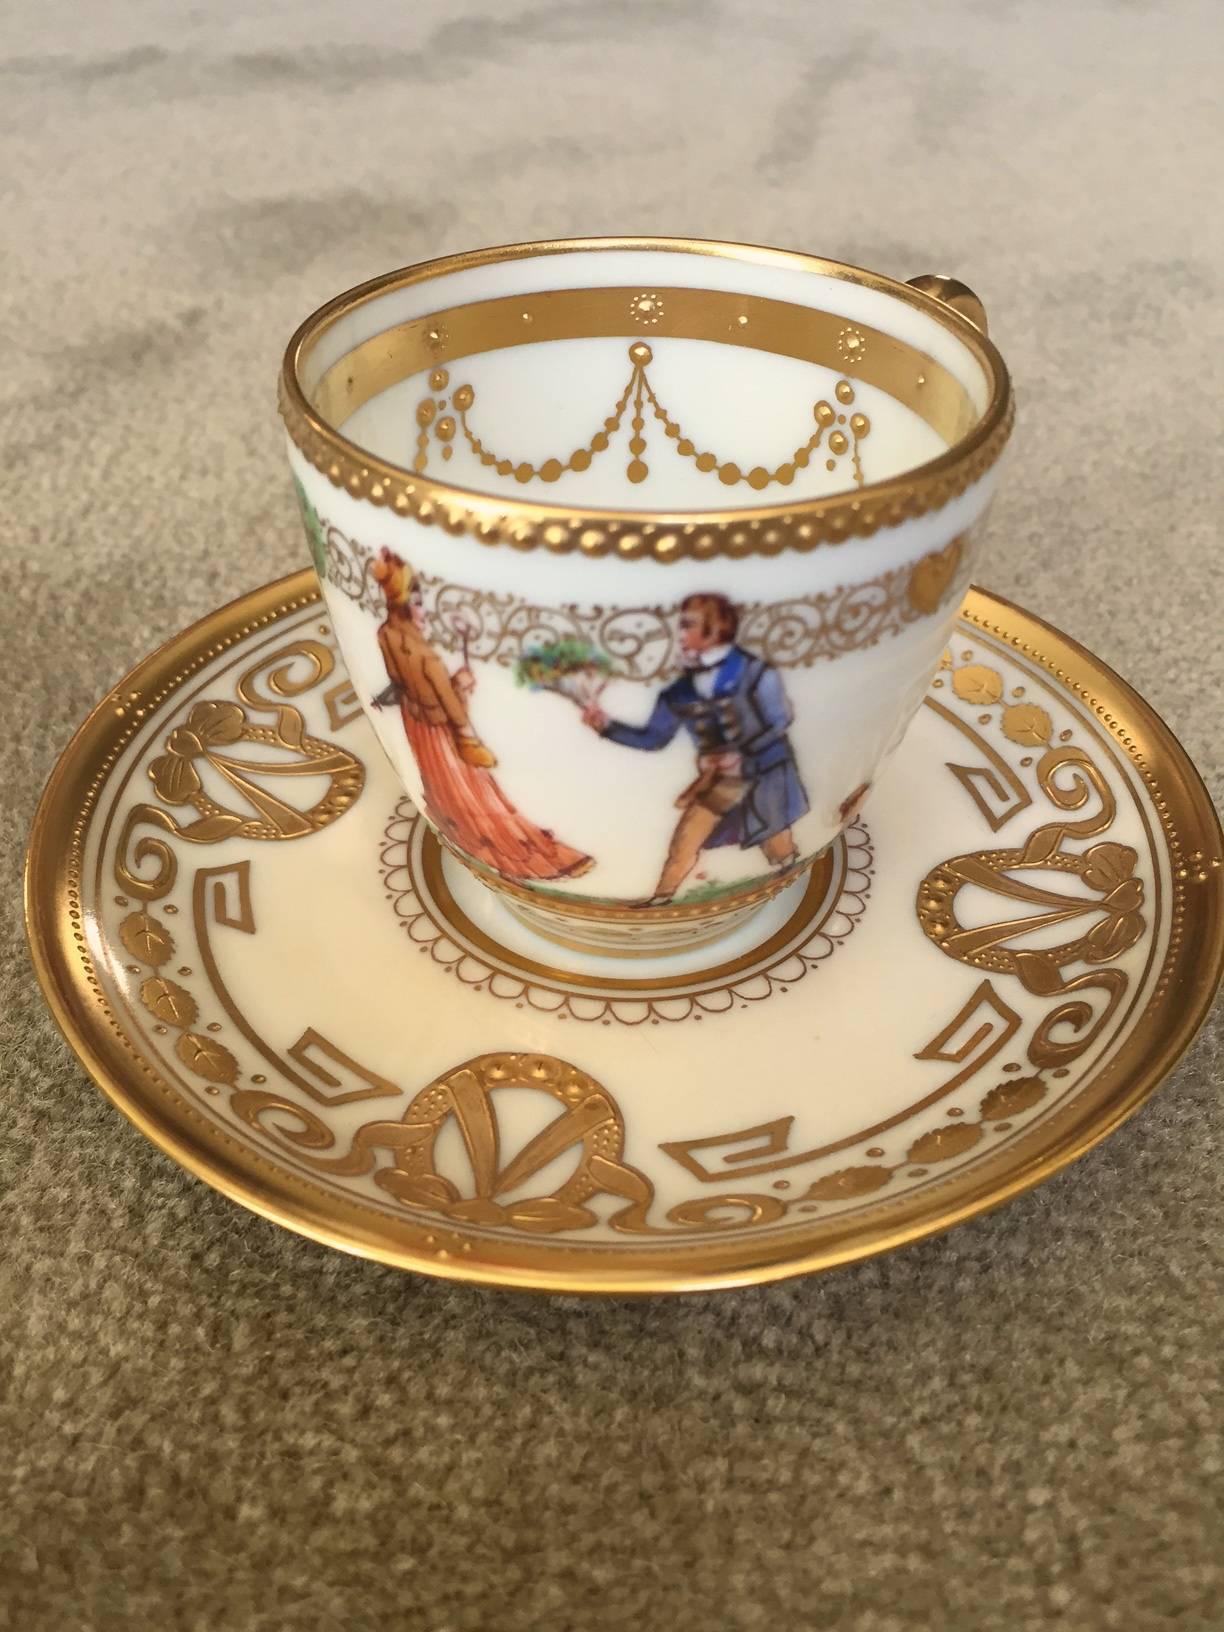 Fine Dinner Service for 14 by Ambrosius Lamm of Dresden, circa 1900 In Excellent Condition For Sale In Redding, CA